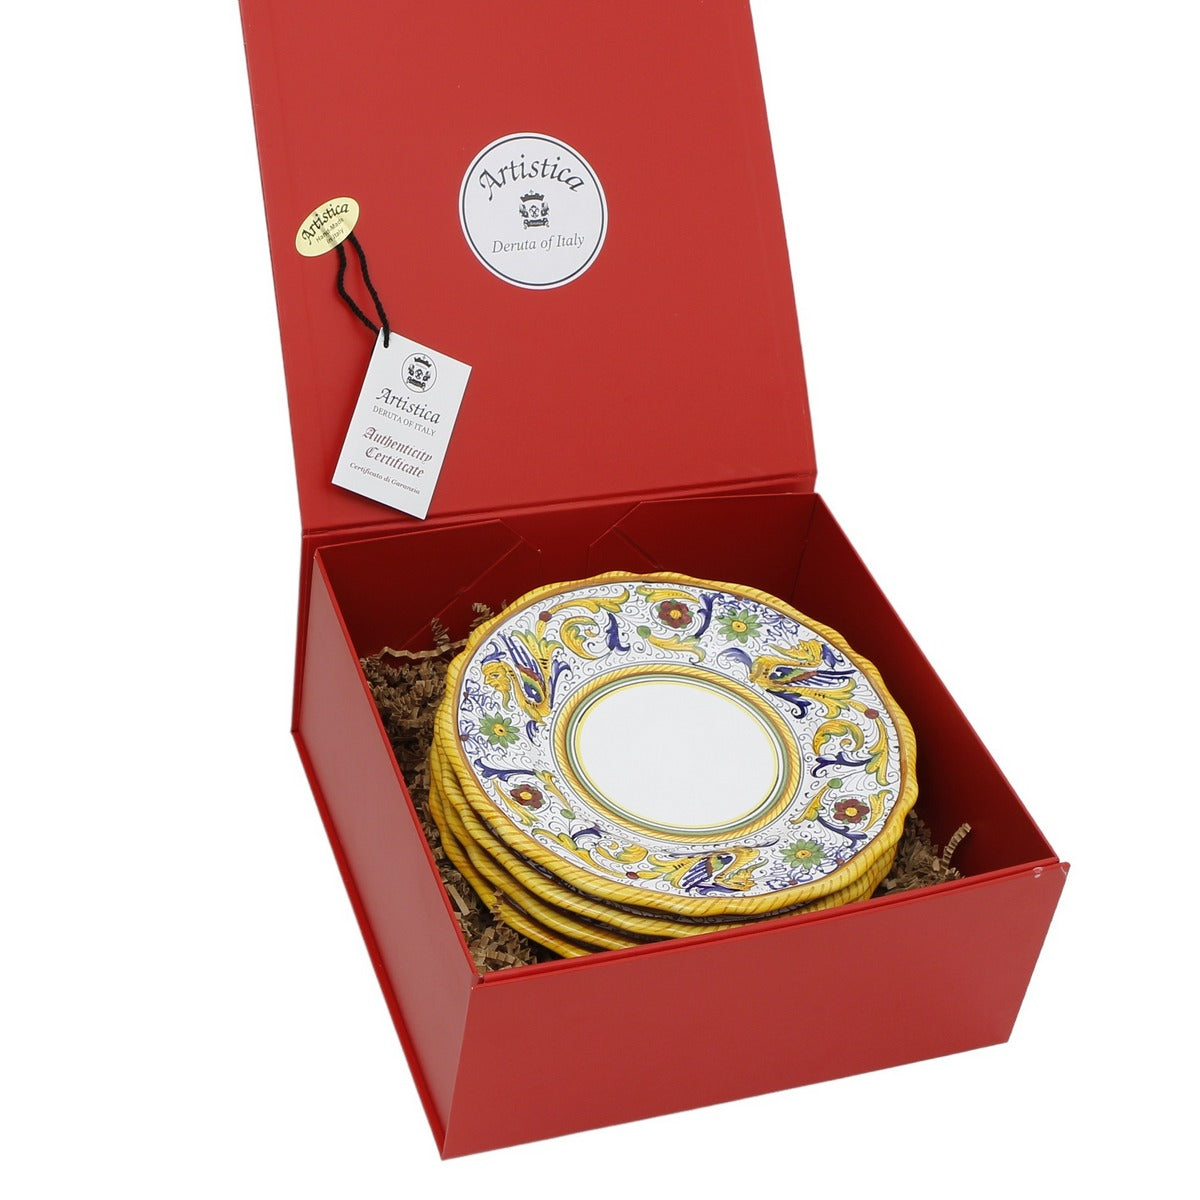 GIFT BOX: DeLuxe Glossy Red Gift Box with Raffaellesco White Center Salad Plates (Set of 4 pcs)